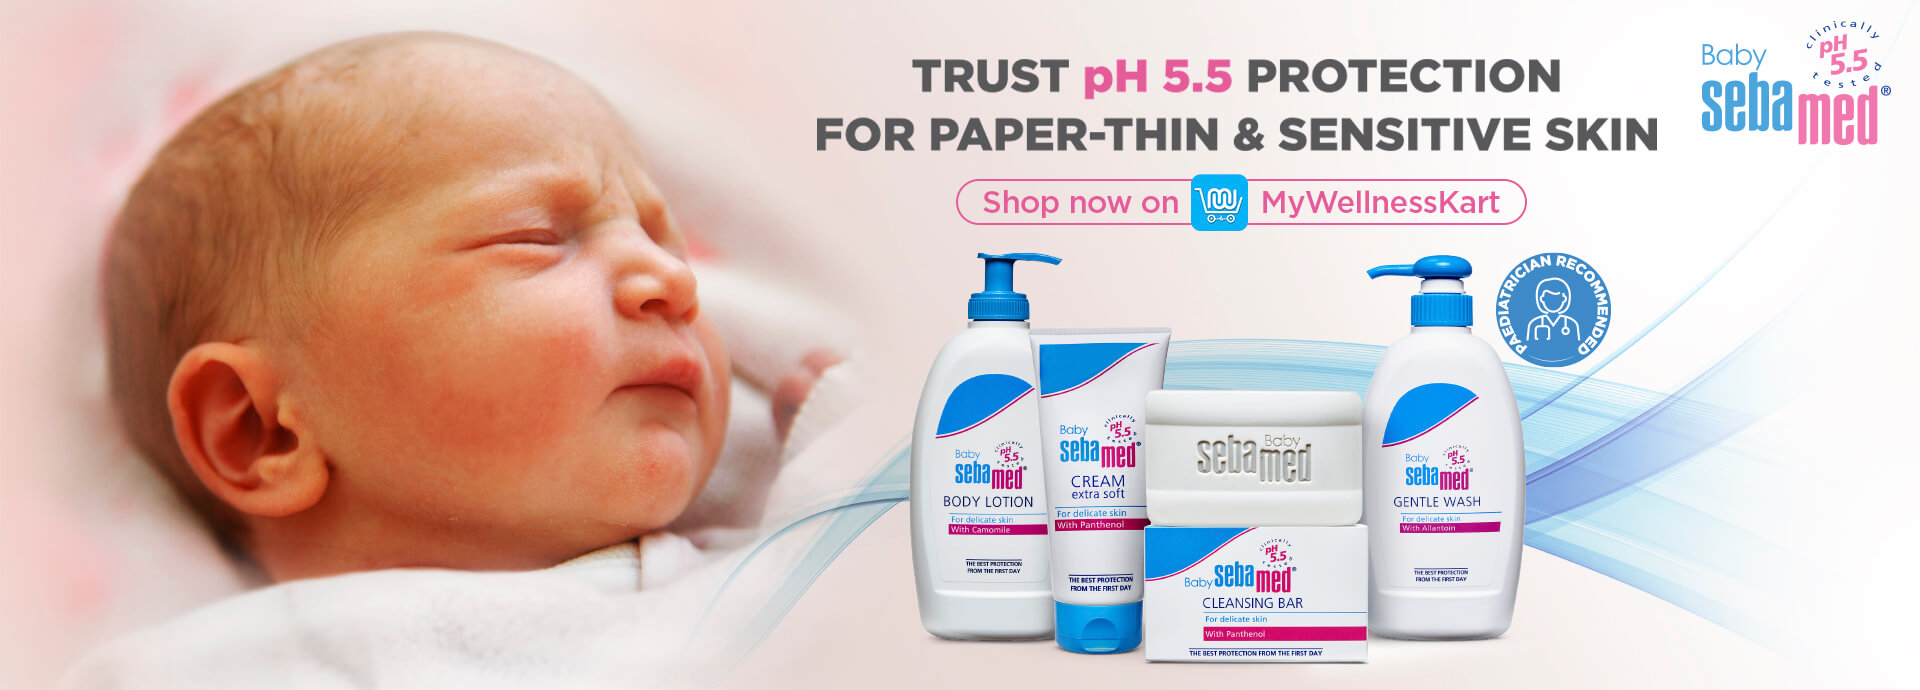 pH 5.5 Protection for Paper-thin and Sensitive Skin